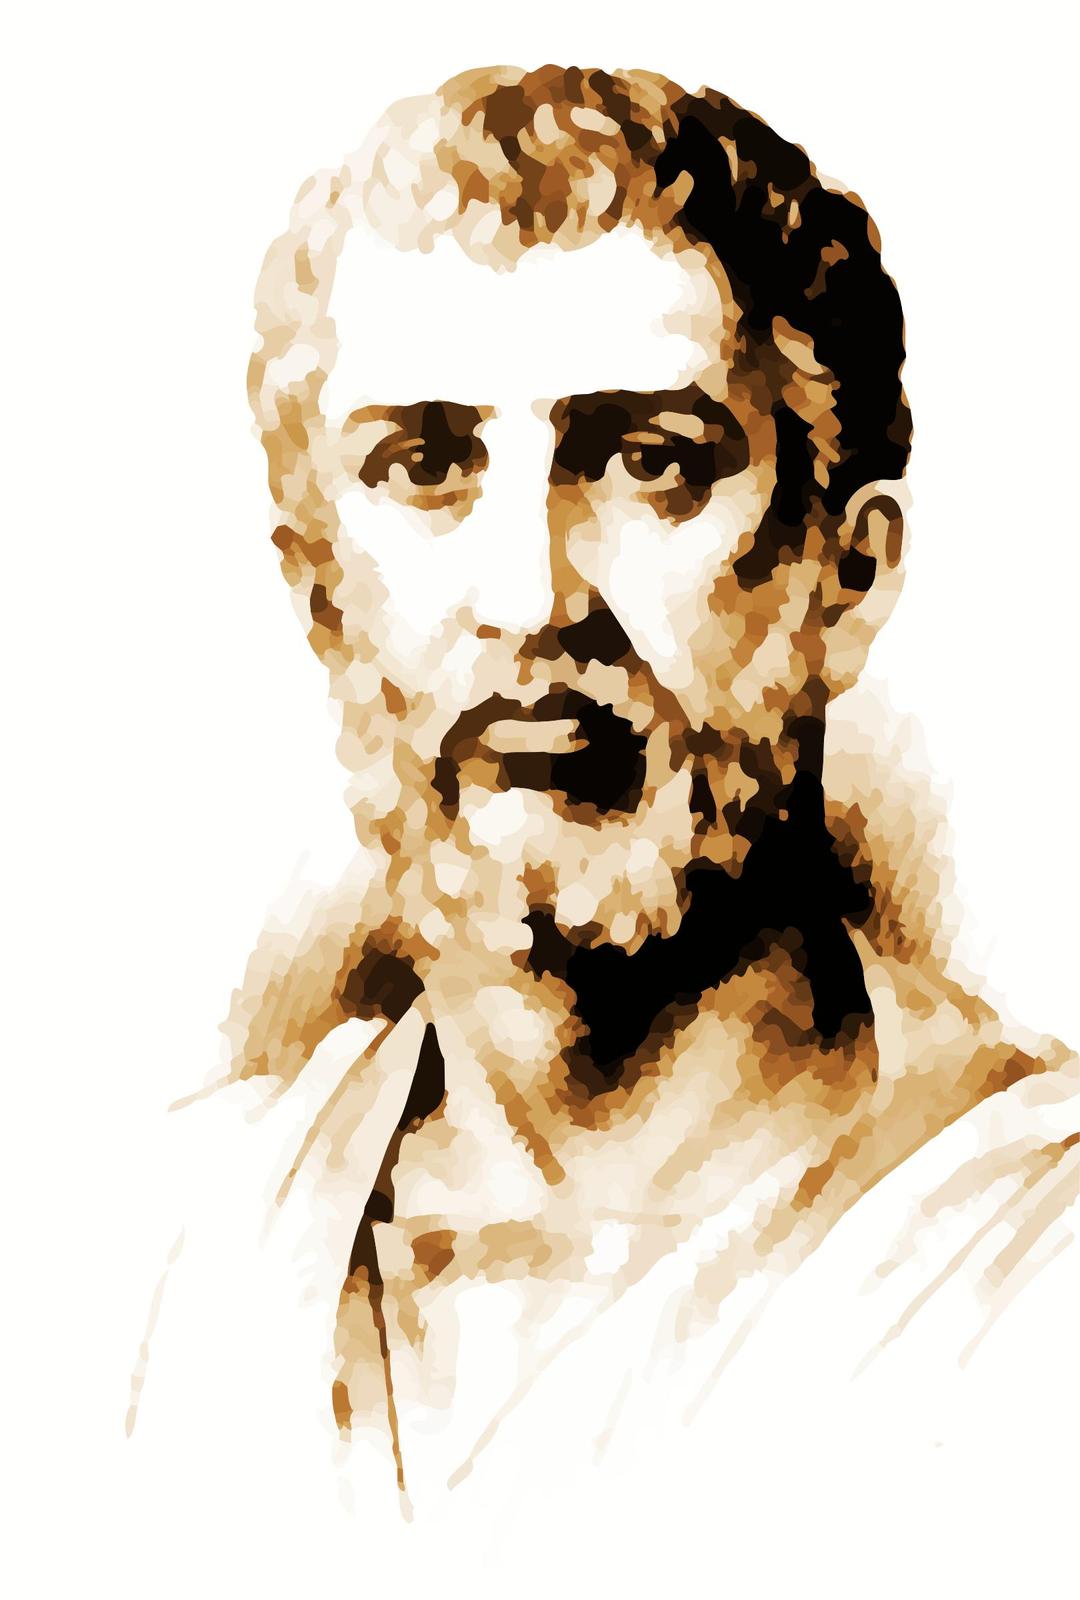 Pericles png transparent